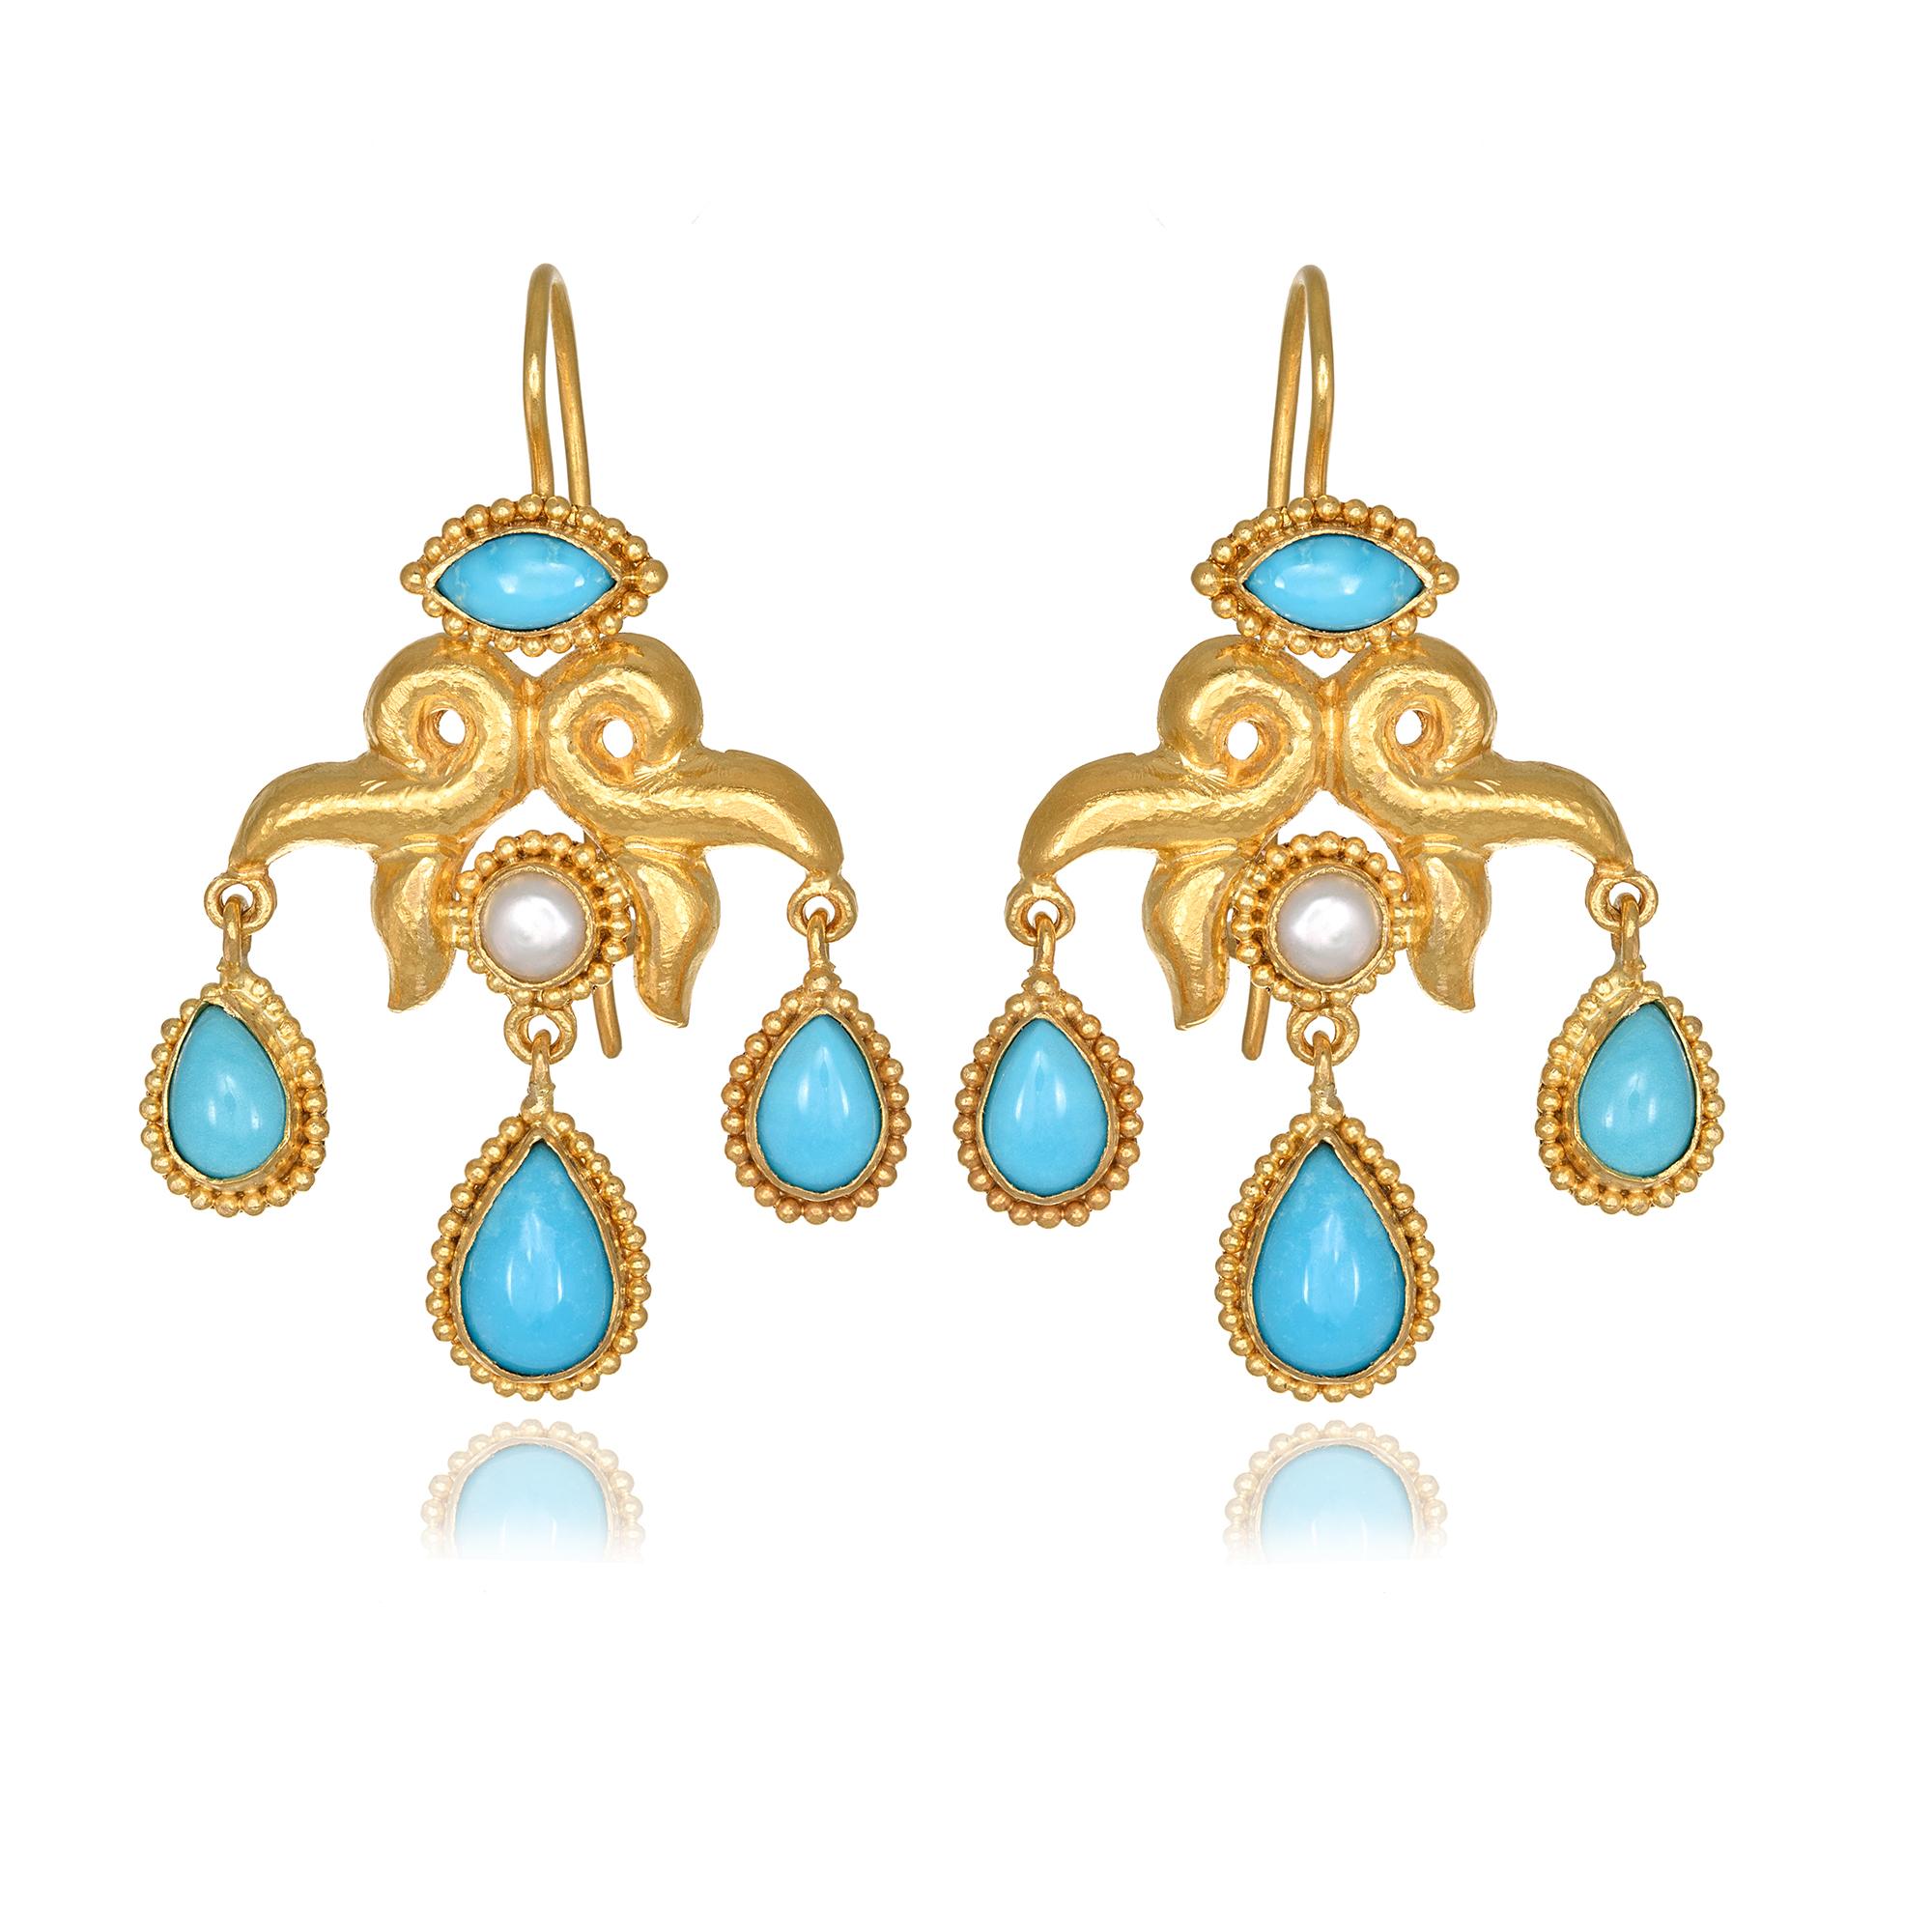 Chandeliers Earrings handcrafted in 22Kt yellow gold, featuring pear Turquoises and Pearl.  This pair of earrings is braided according to the traditional techniques of hand hammering and granulation. The play of light and shade across the pattern of